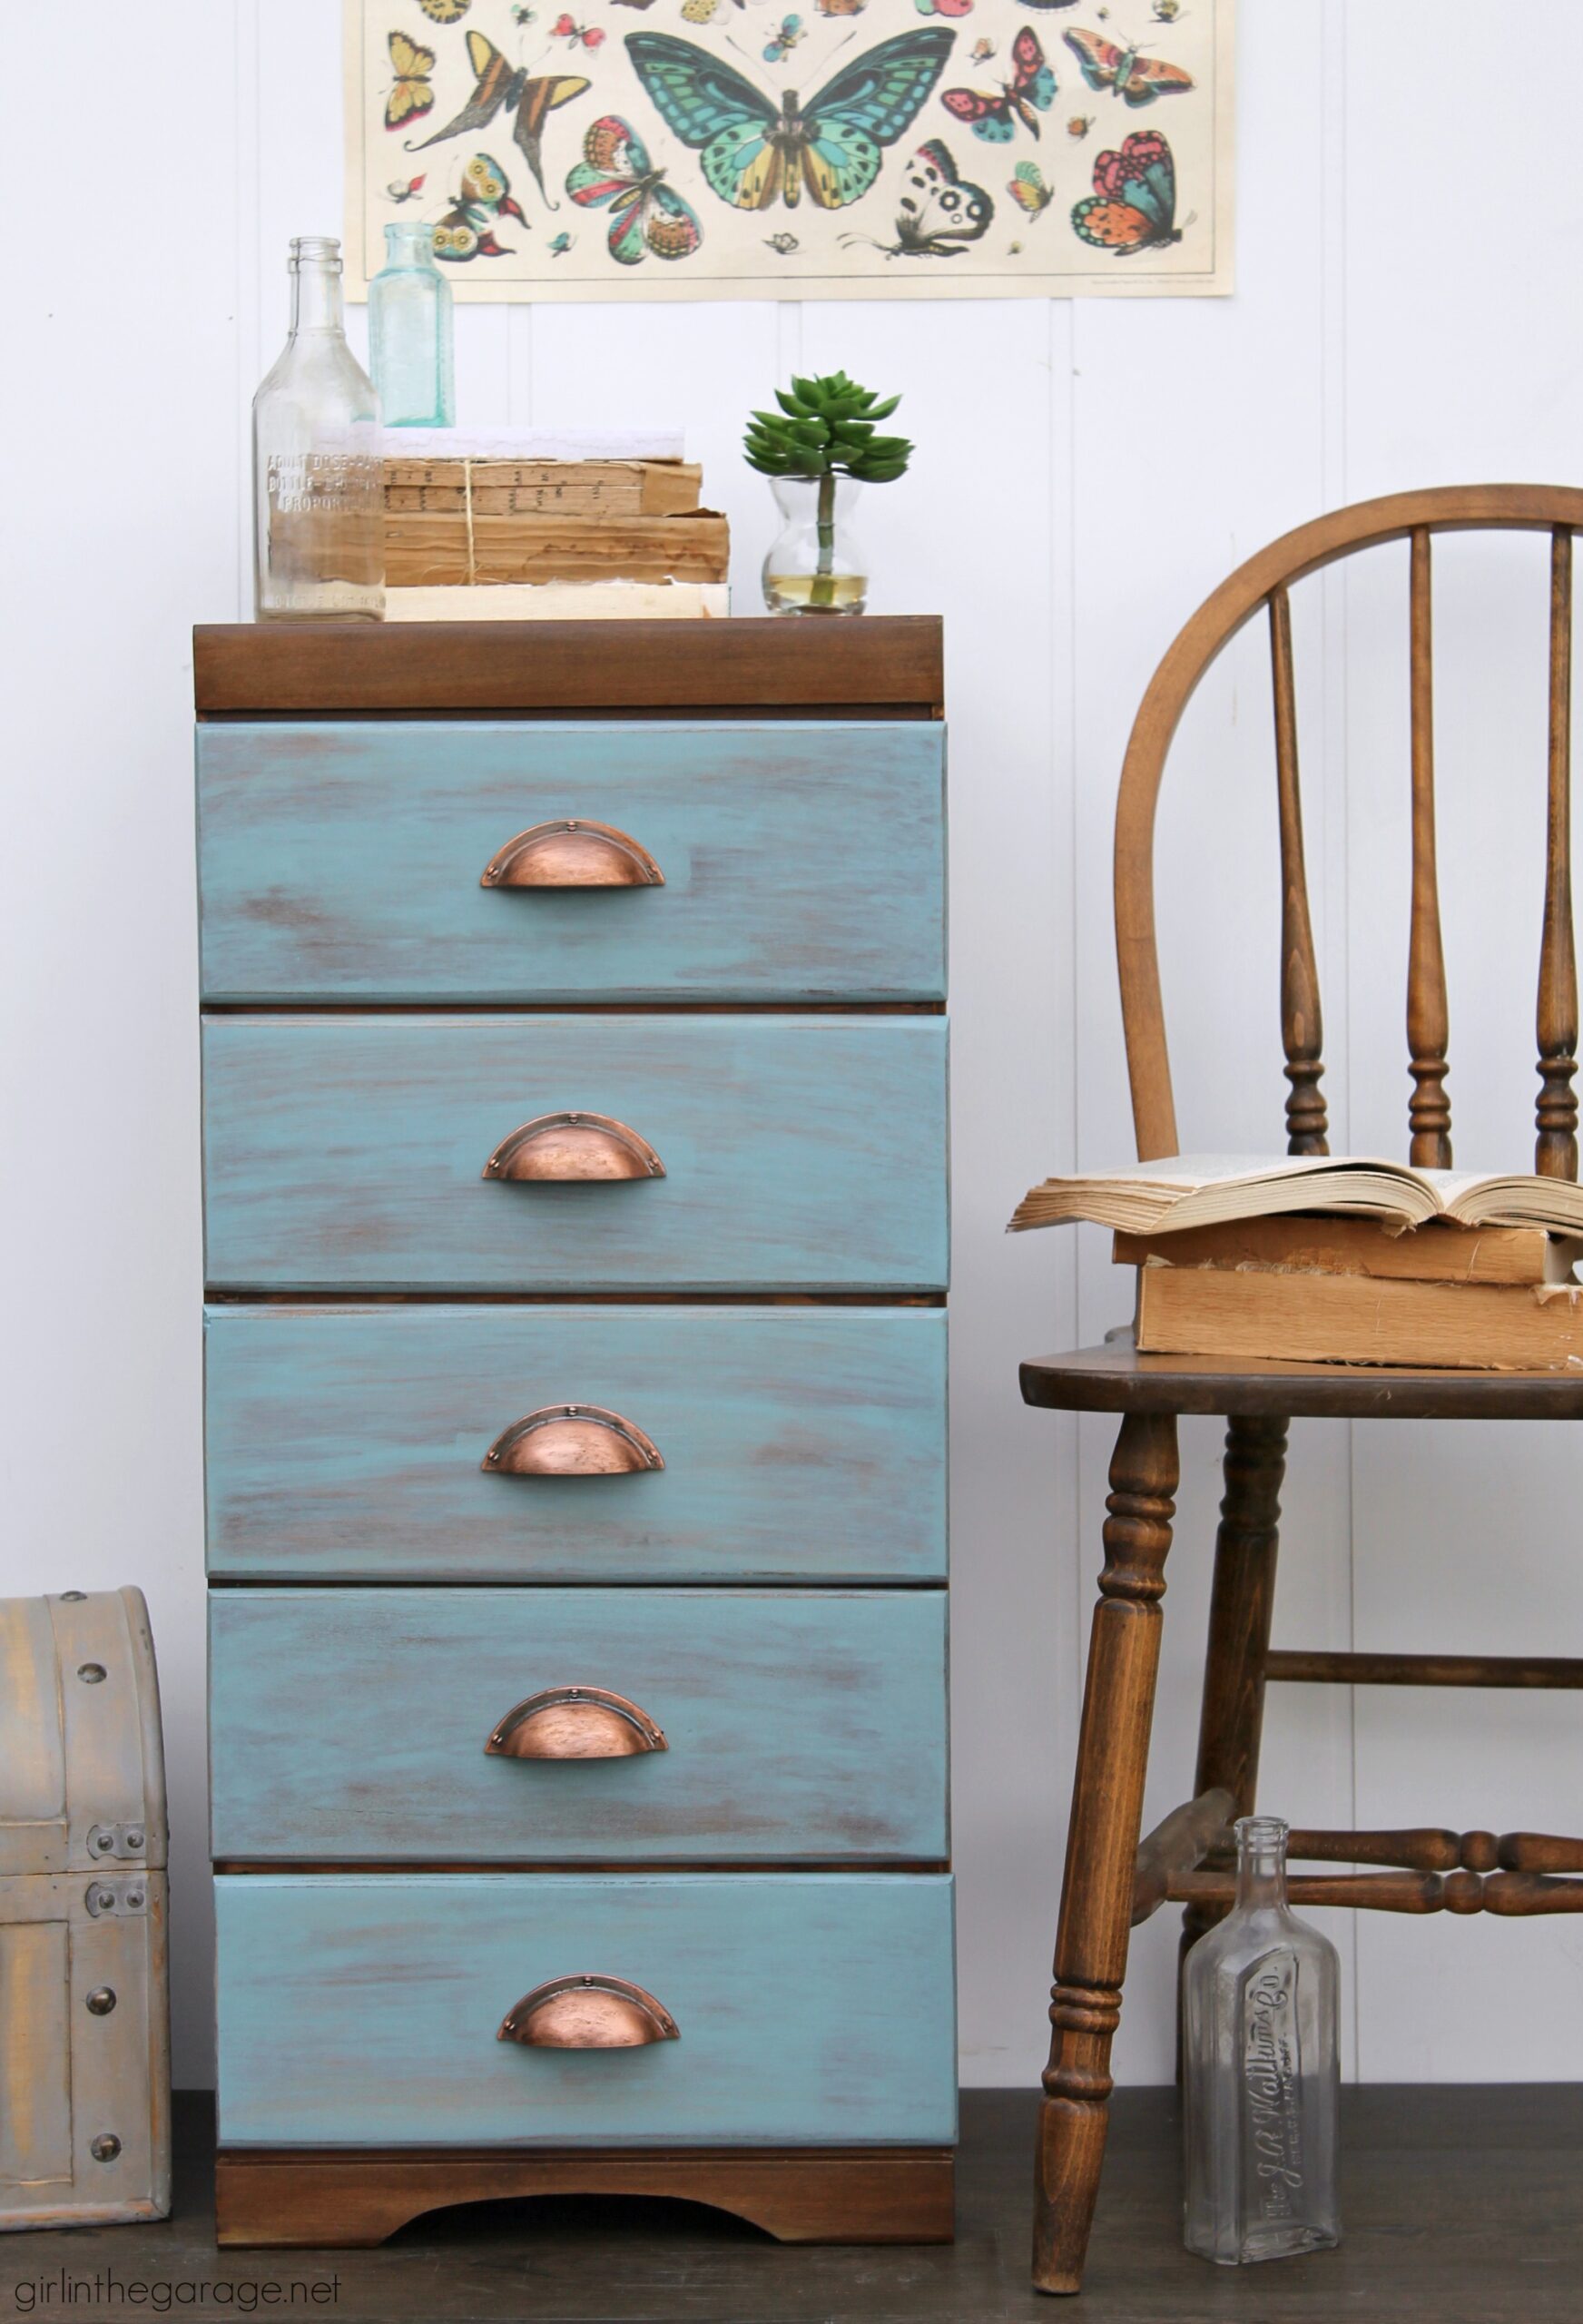 Learn how to refinish a dresser with Minwax products including Vintage Blue, the 2021 Color of the Year. Add faux-aged copper pulls and map paper lined drawers for the finishing touch. #ad DIY makeover ideas by Girl in the Garage